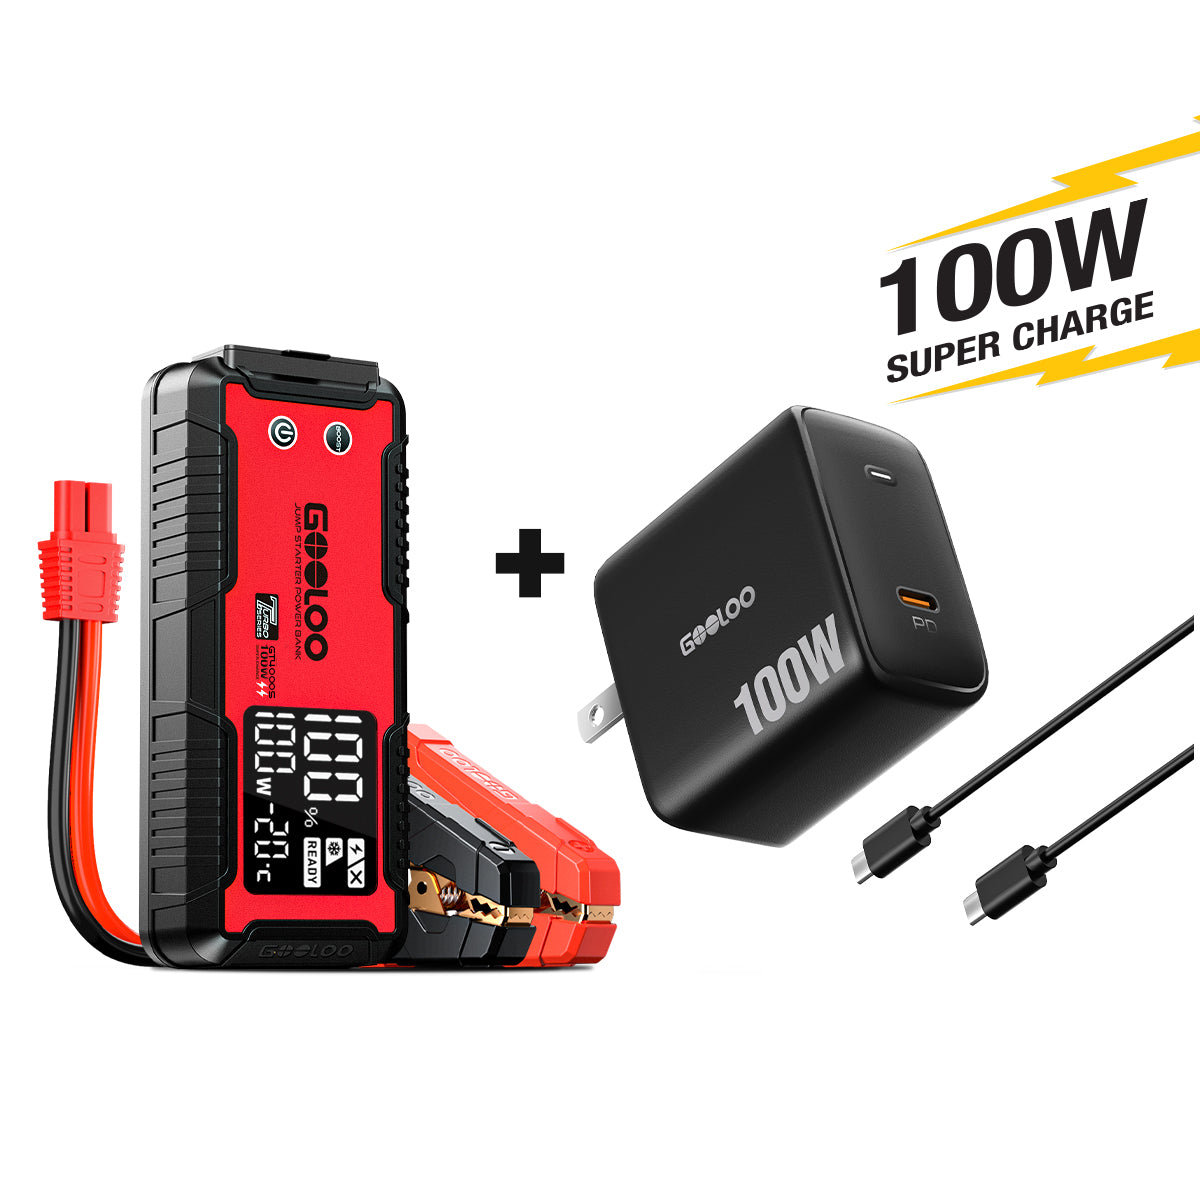 Add a GOOLOO jump starter to your car with new all-time lows from